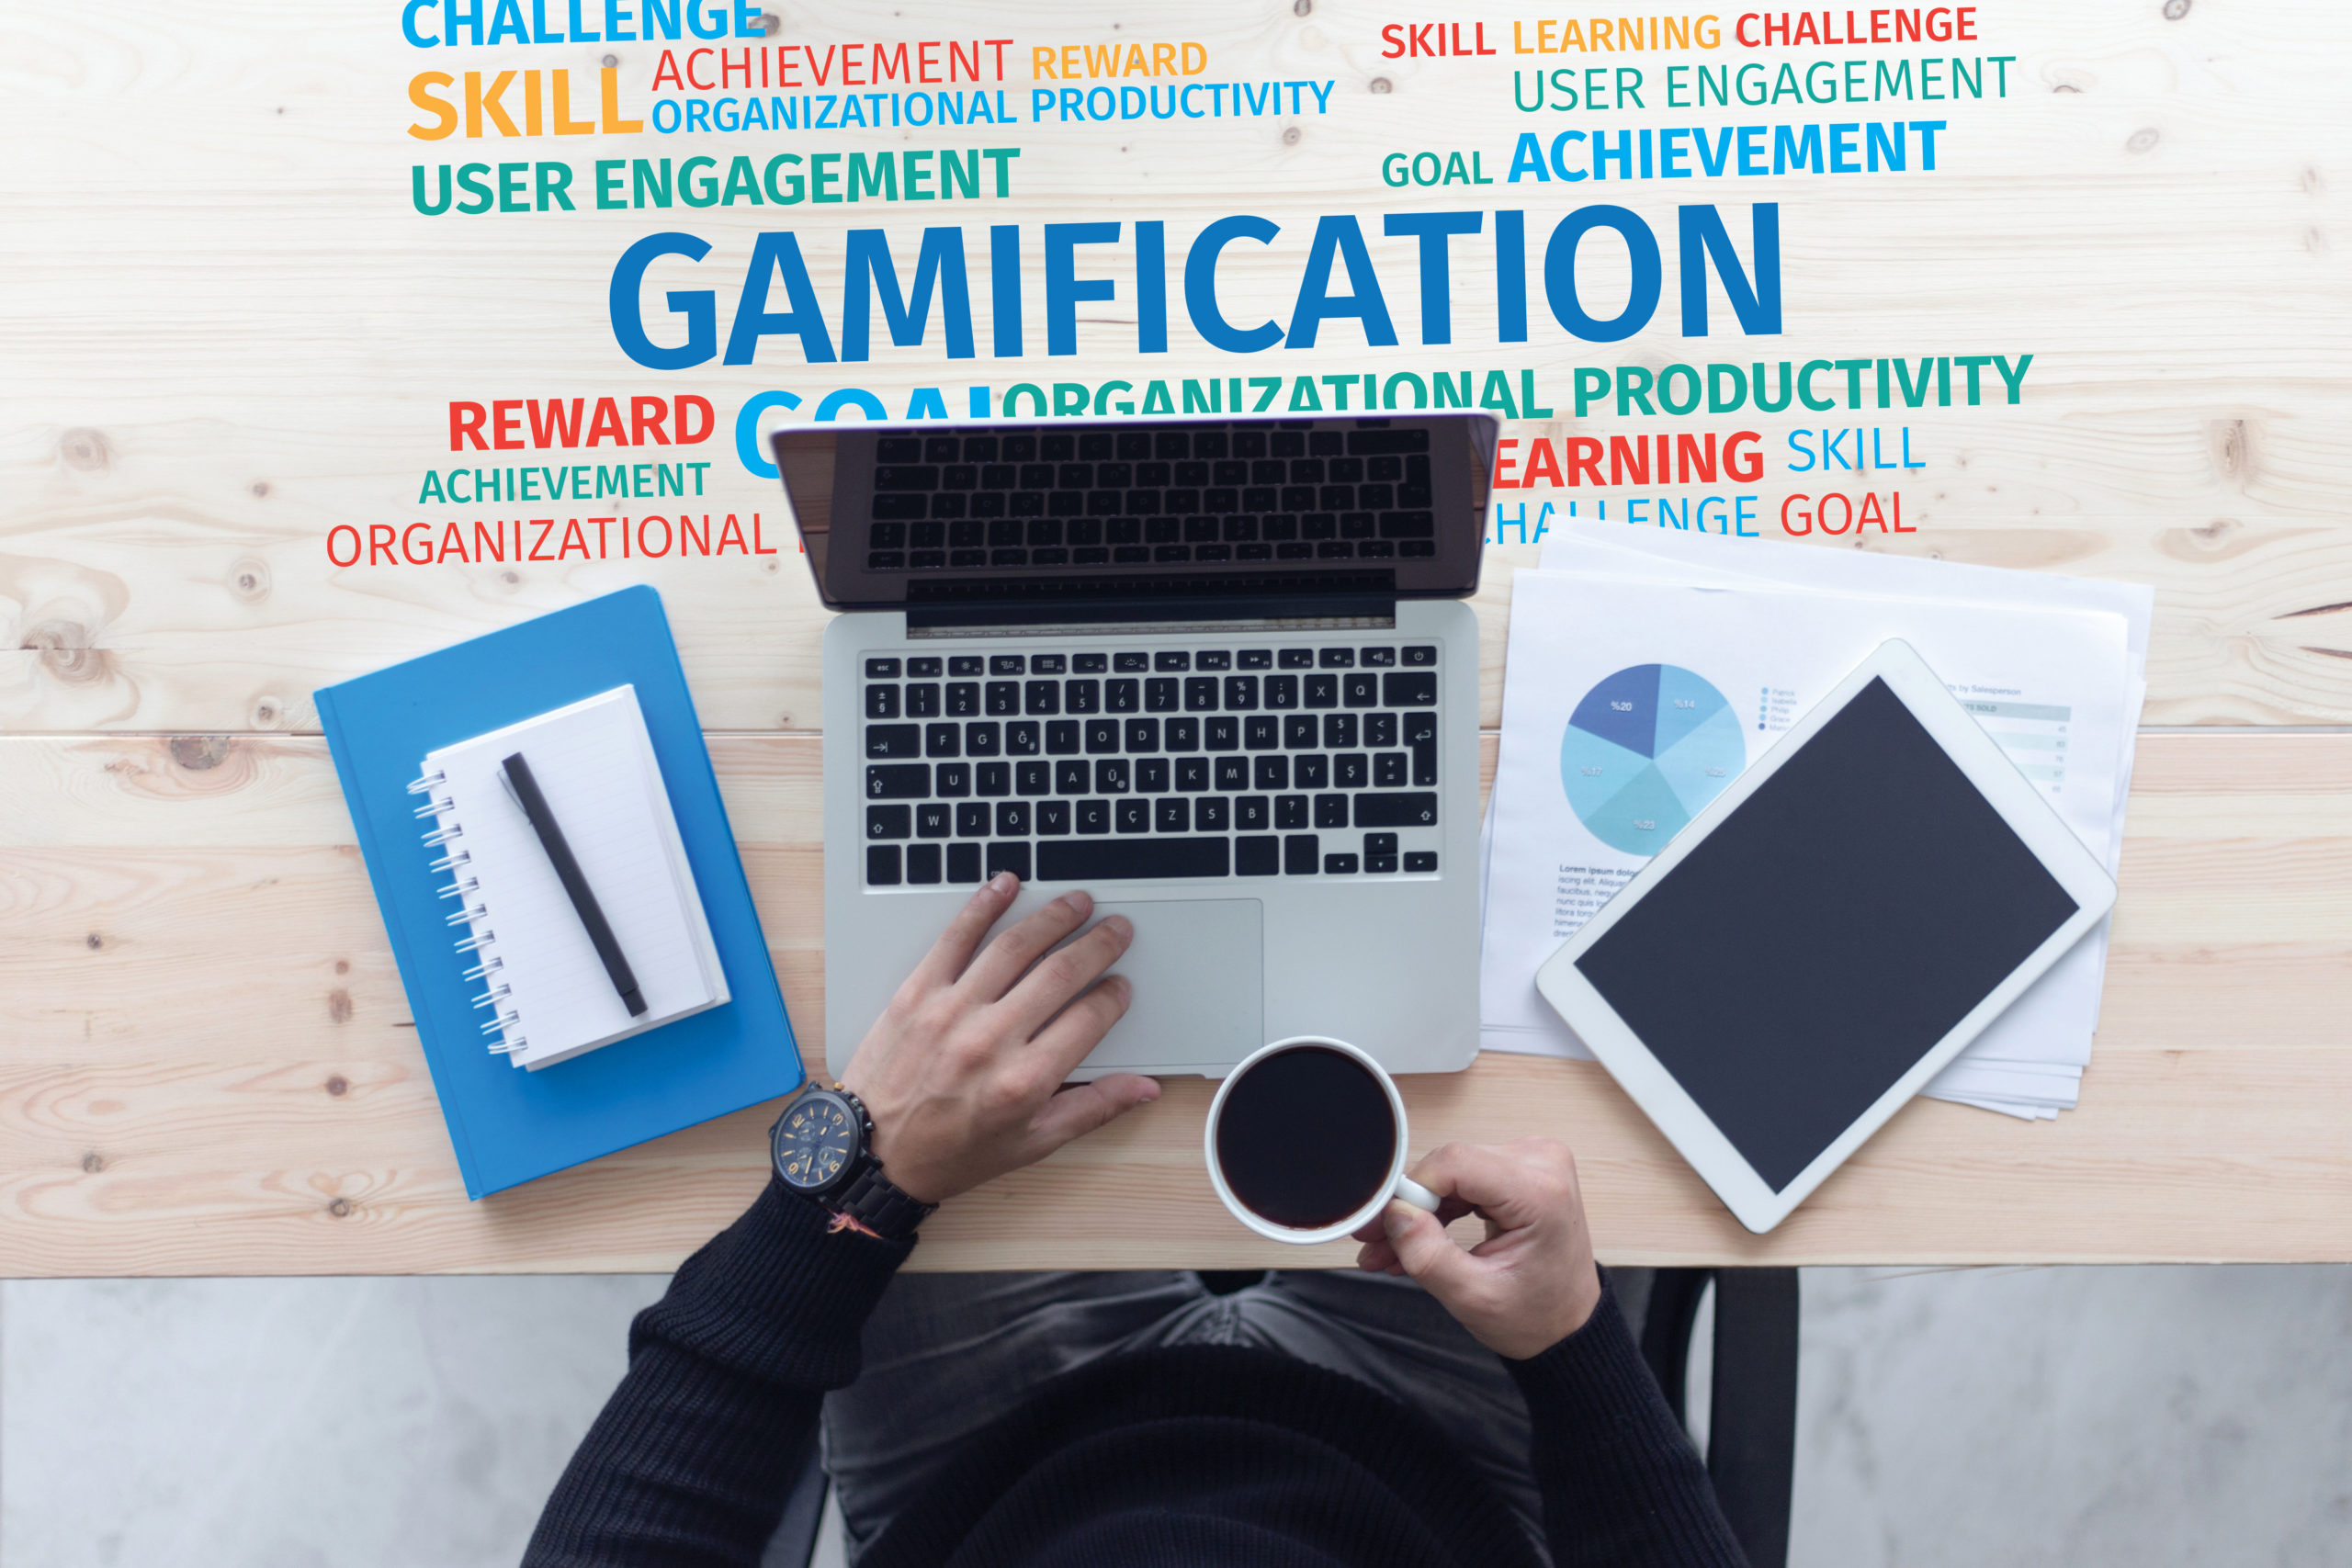 WHAT IS GAMIFICATION? THE SCIENCE BEHIND VOCO